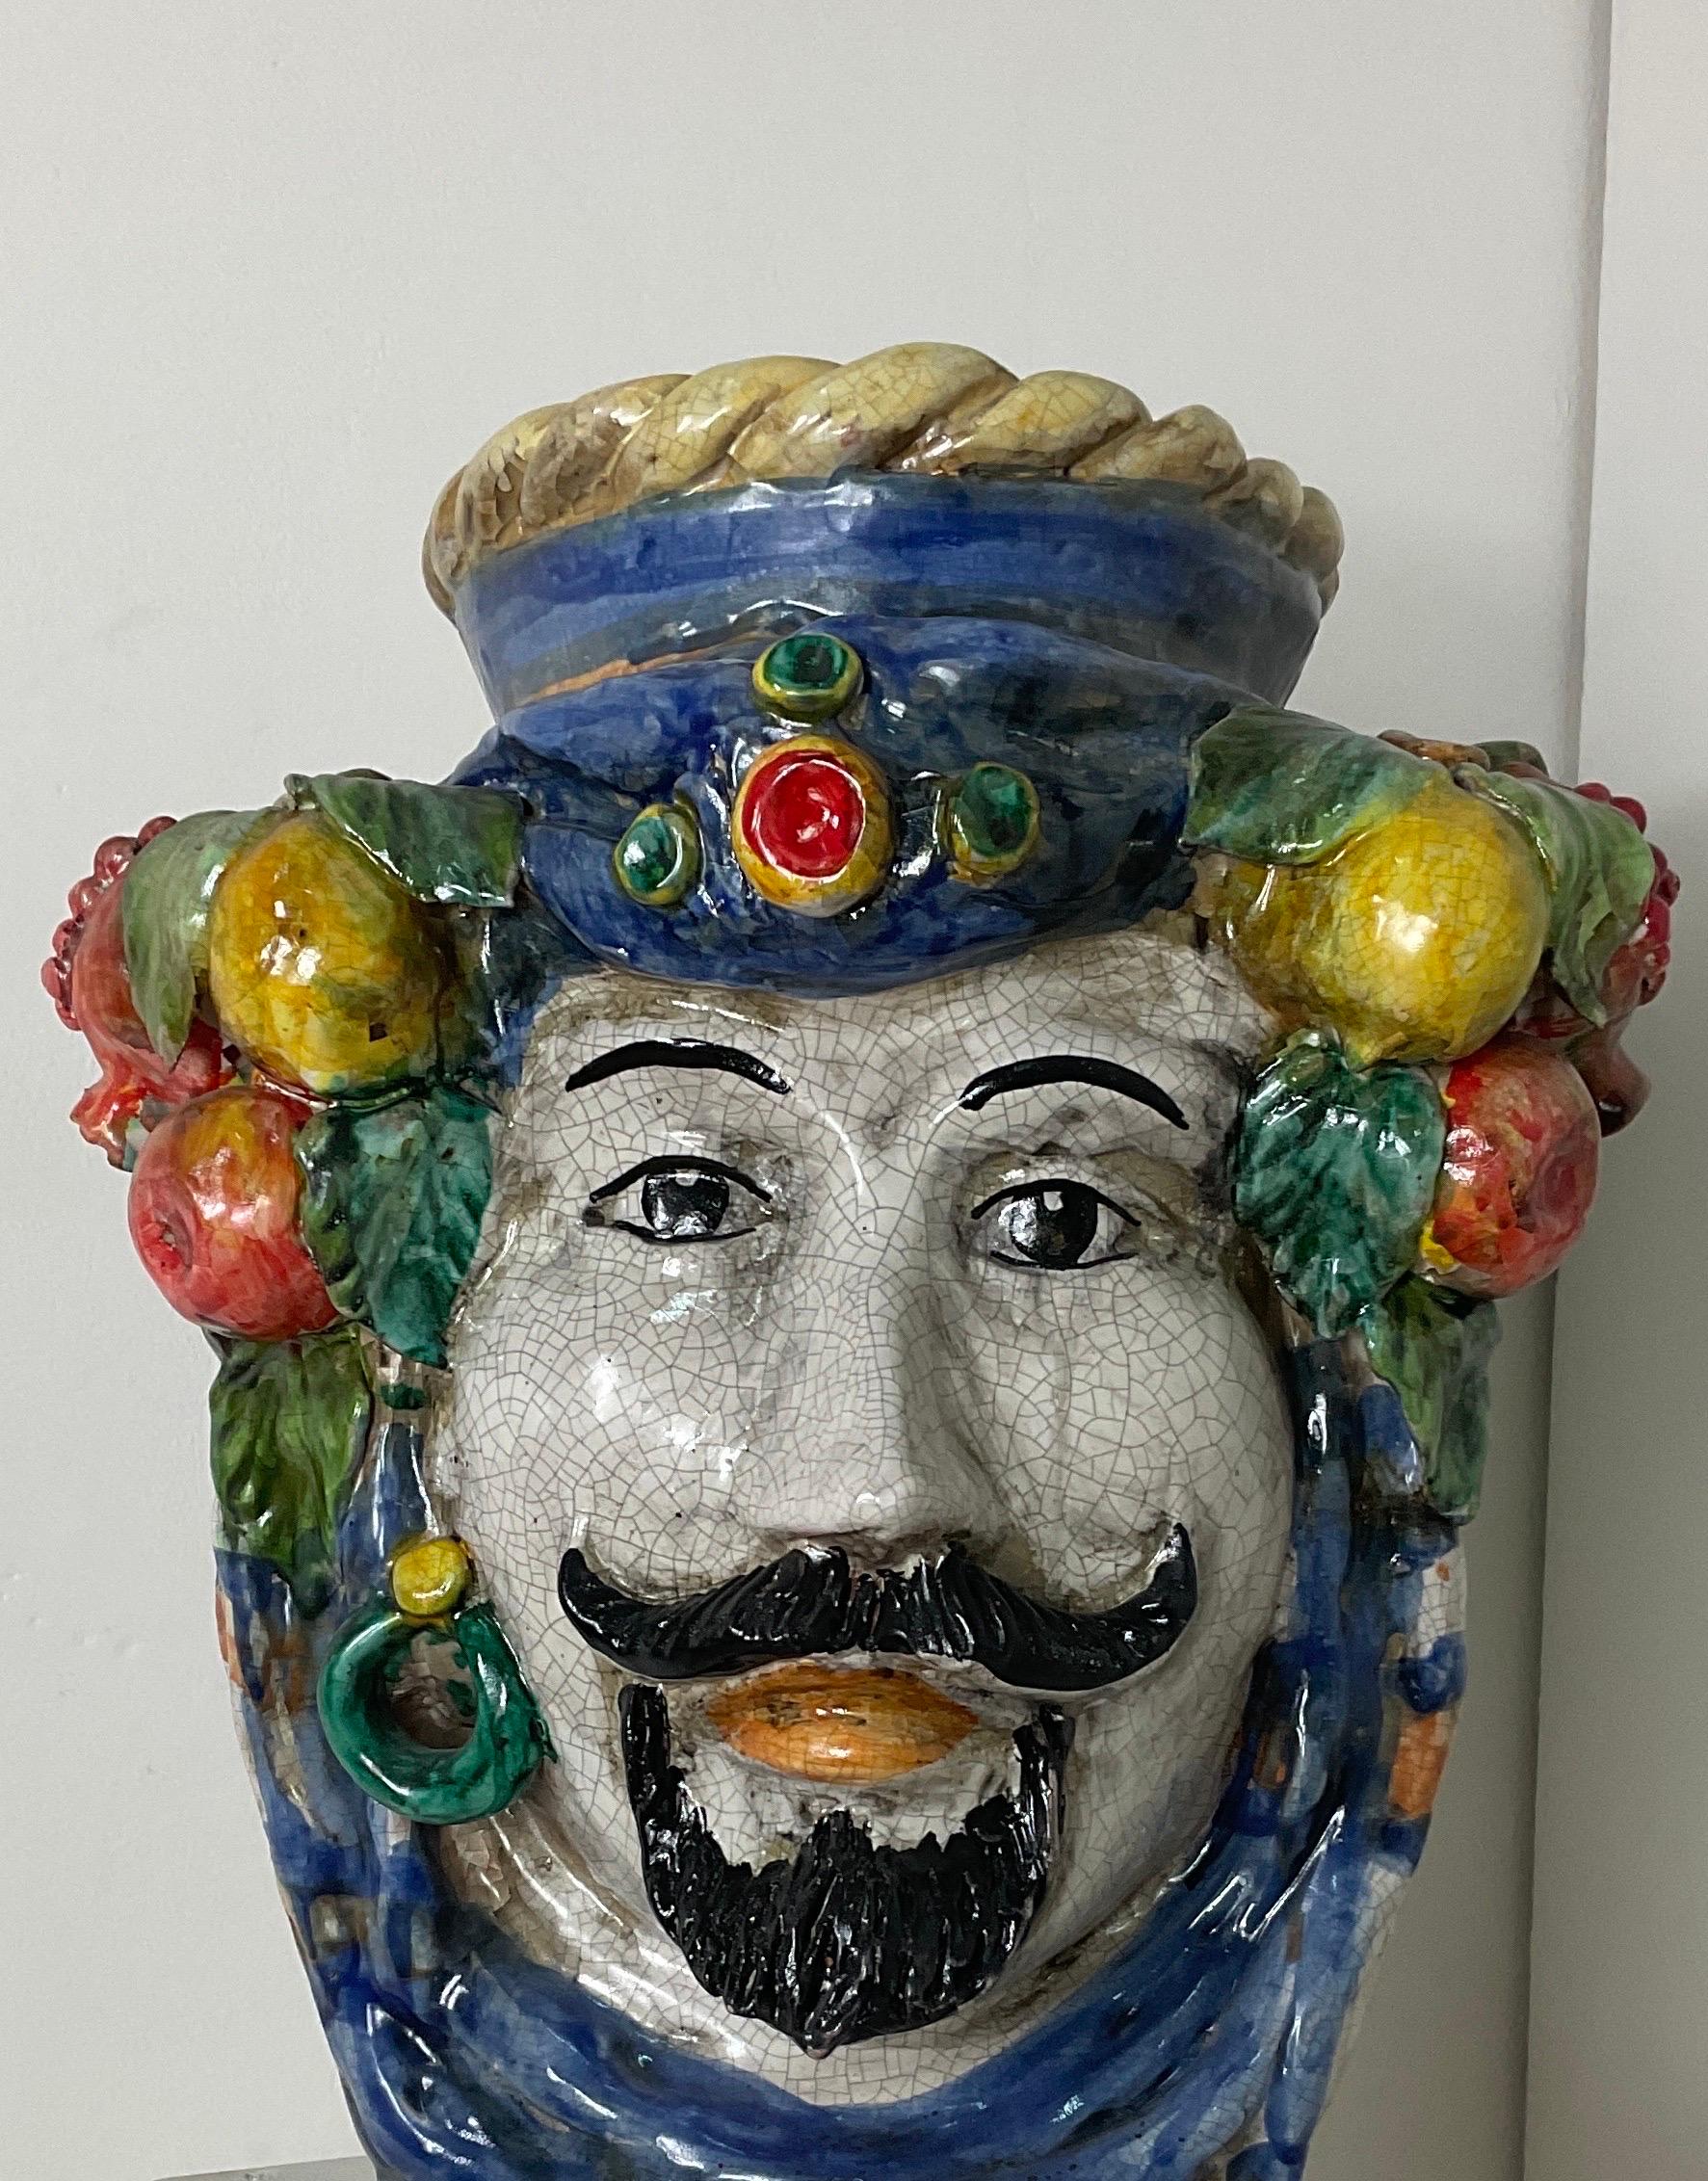 Ceramic coloured Caltagirone head. It is a double-sided bust with a male face and a female face with which we are presented with a liveliness of the two characters through colour. In good condition with wear and tear caused by the passage of time